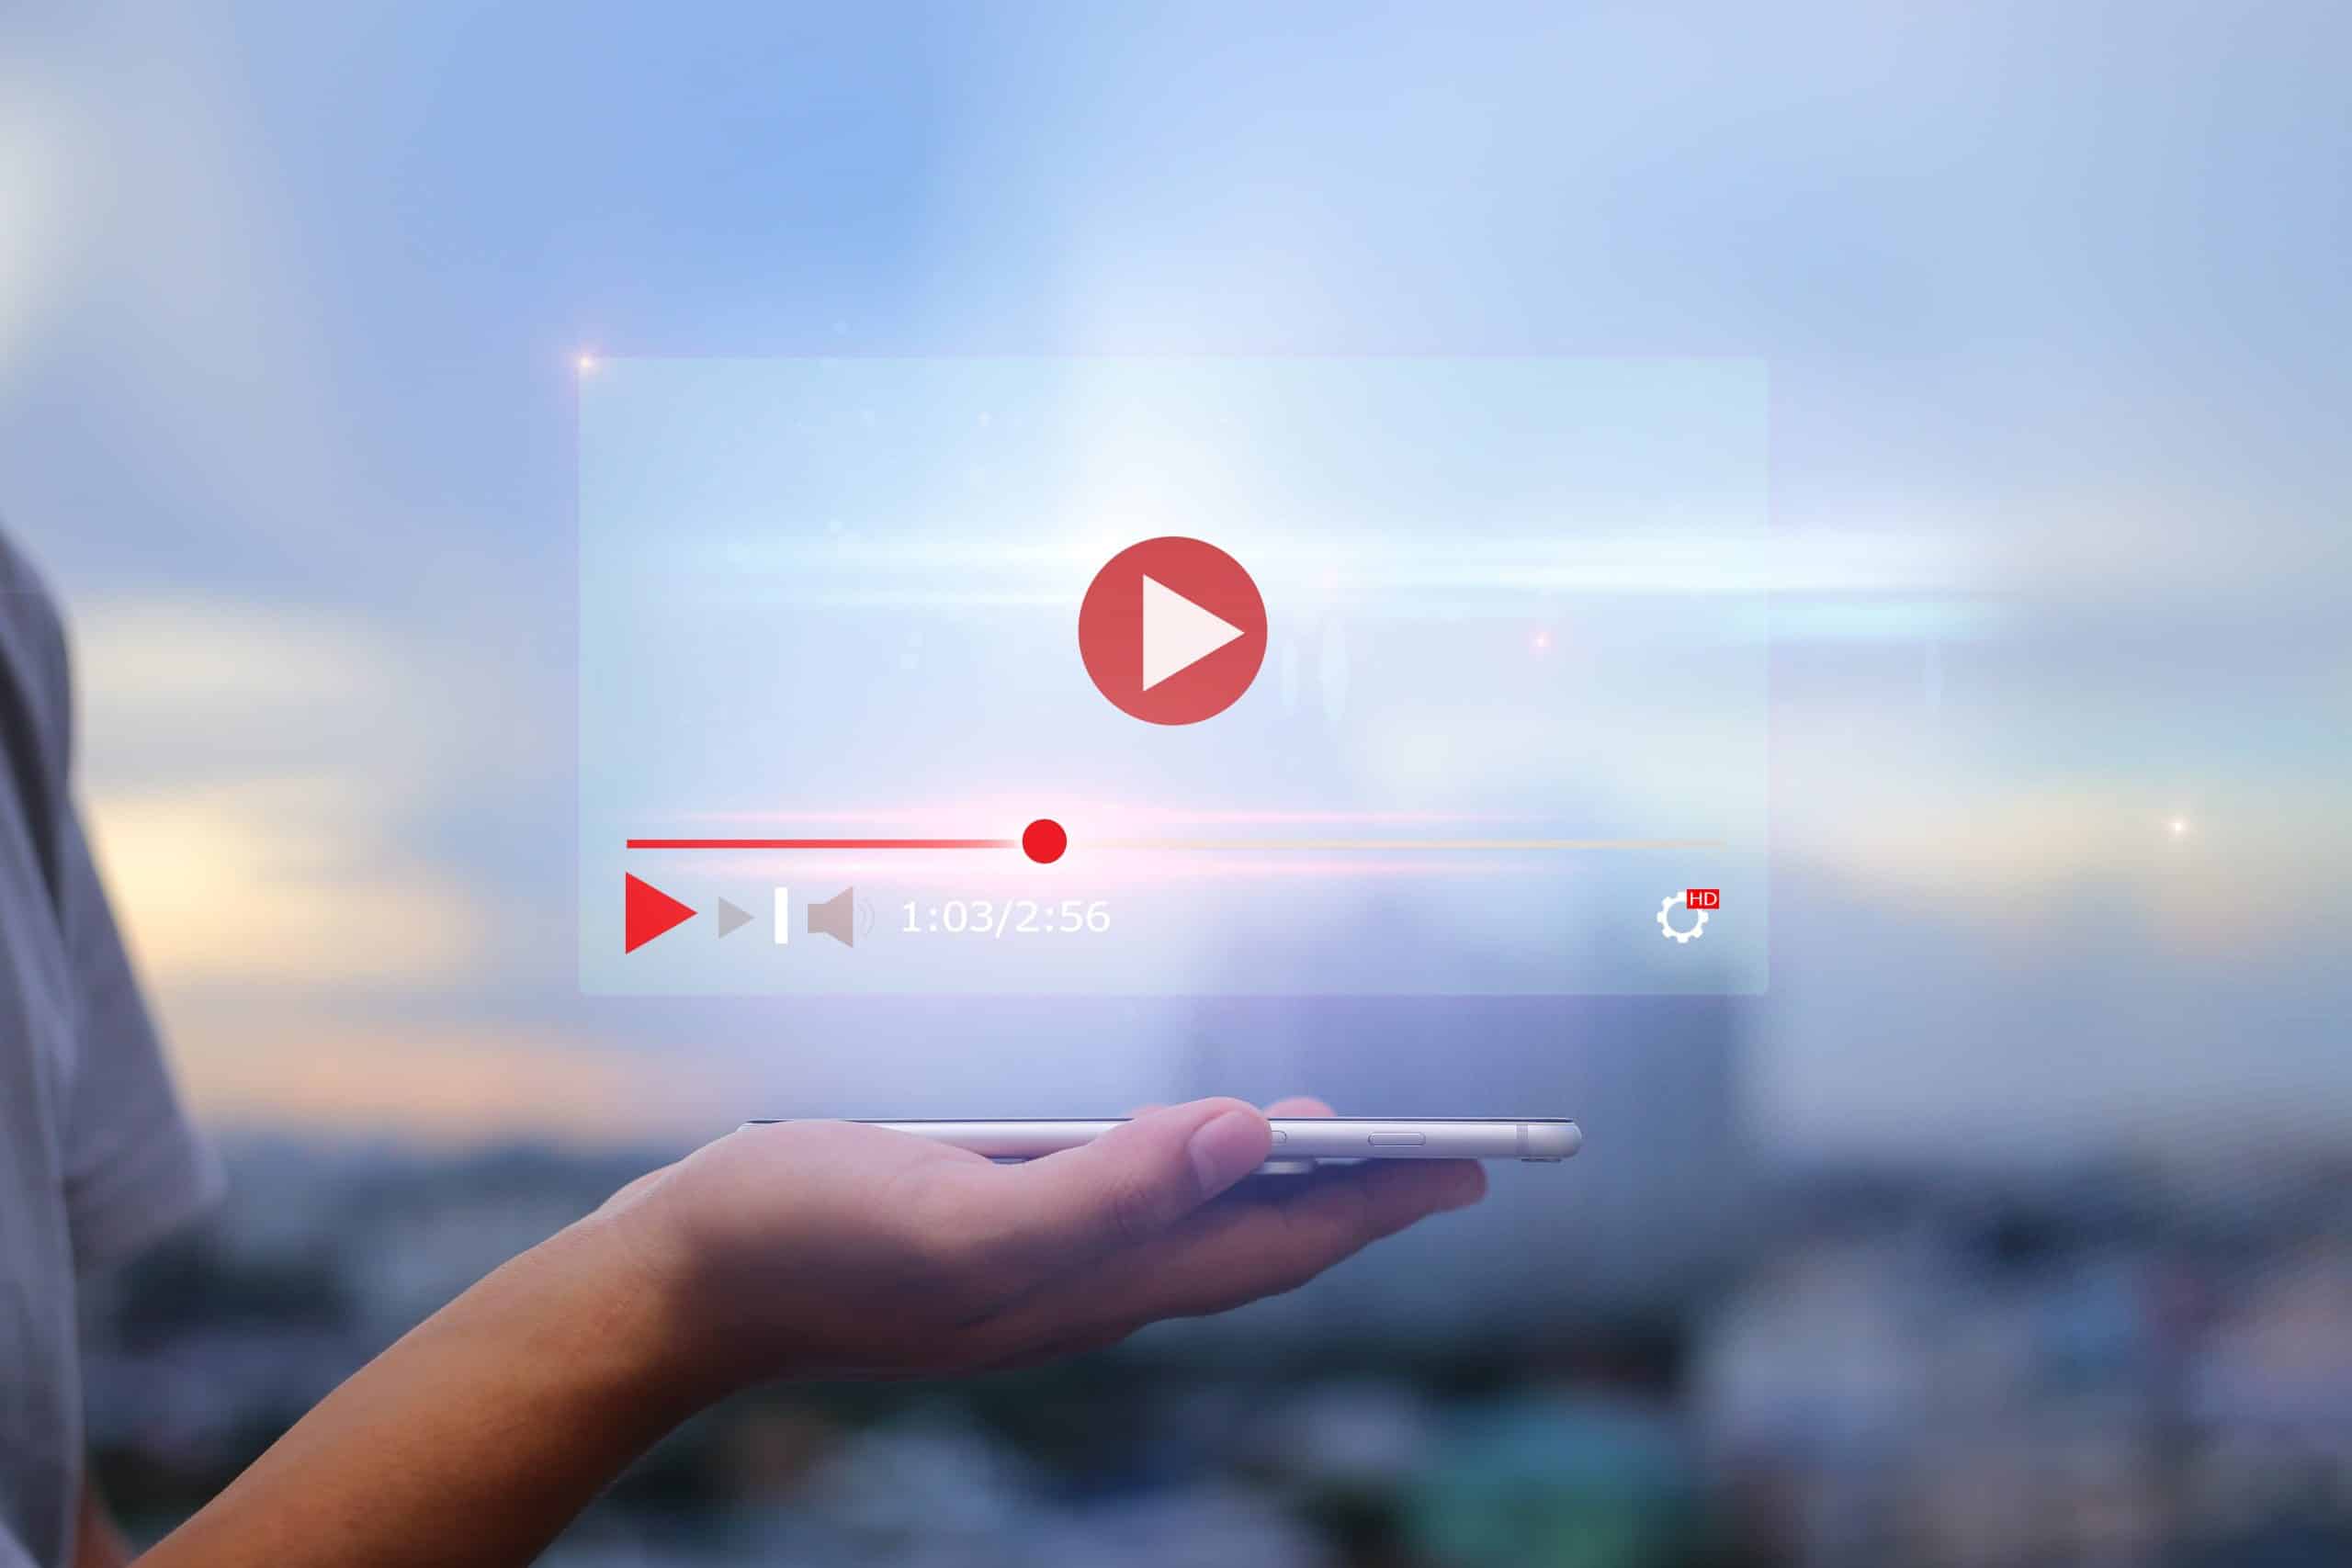 How to Make an Effective Advertisement Video in 5 Easy Steps